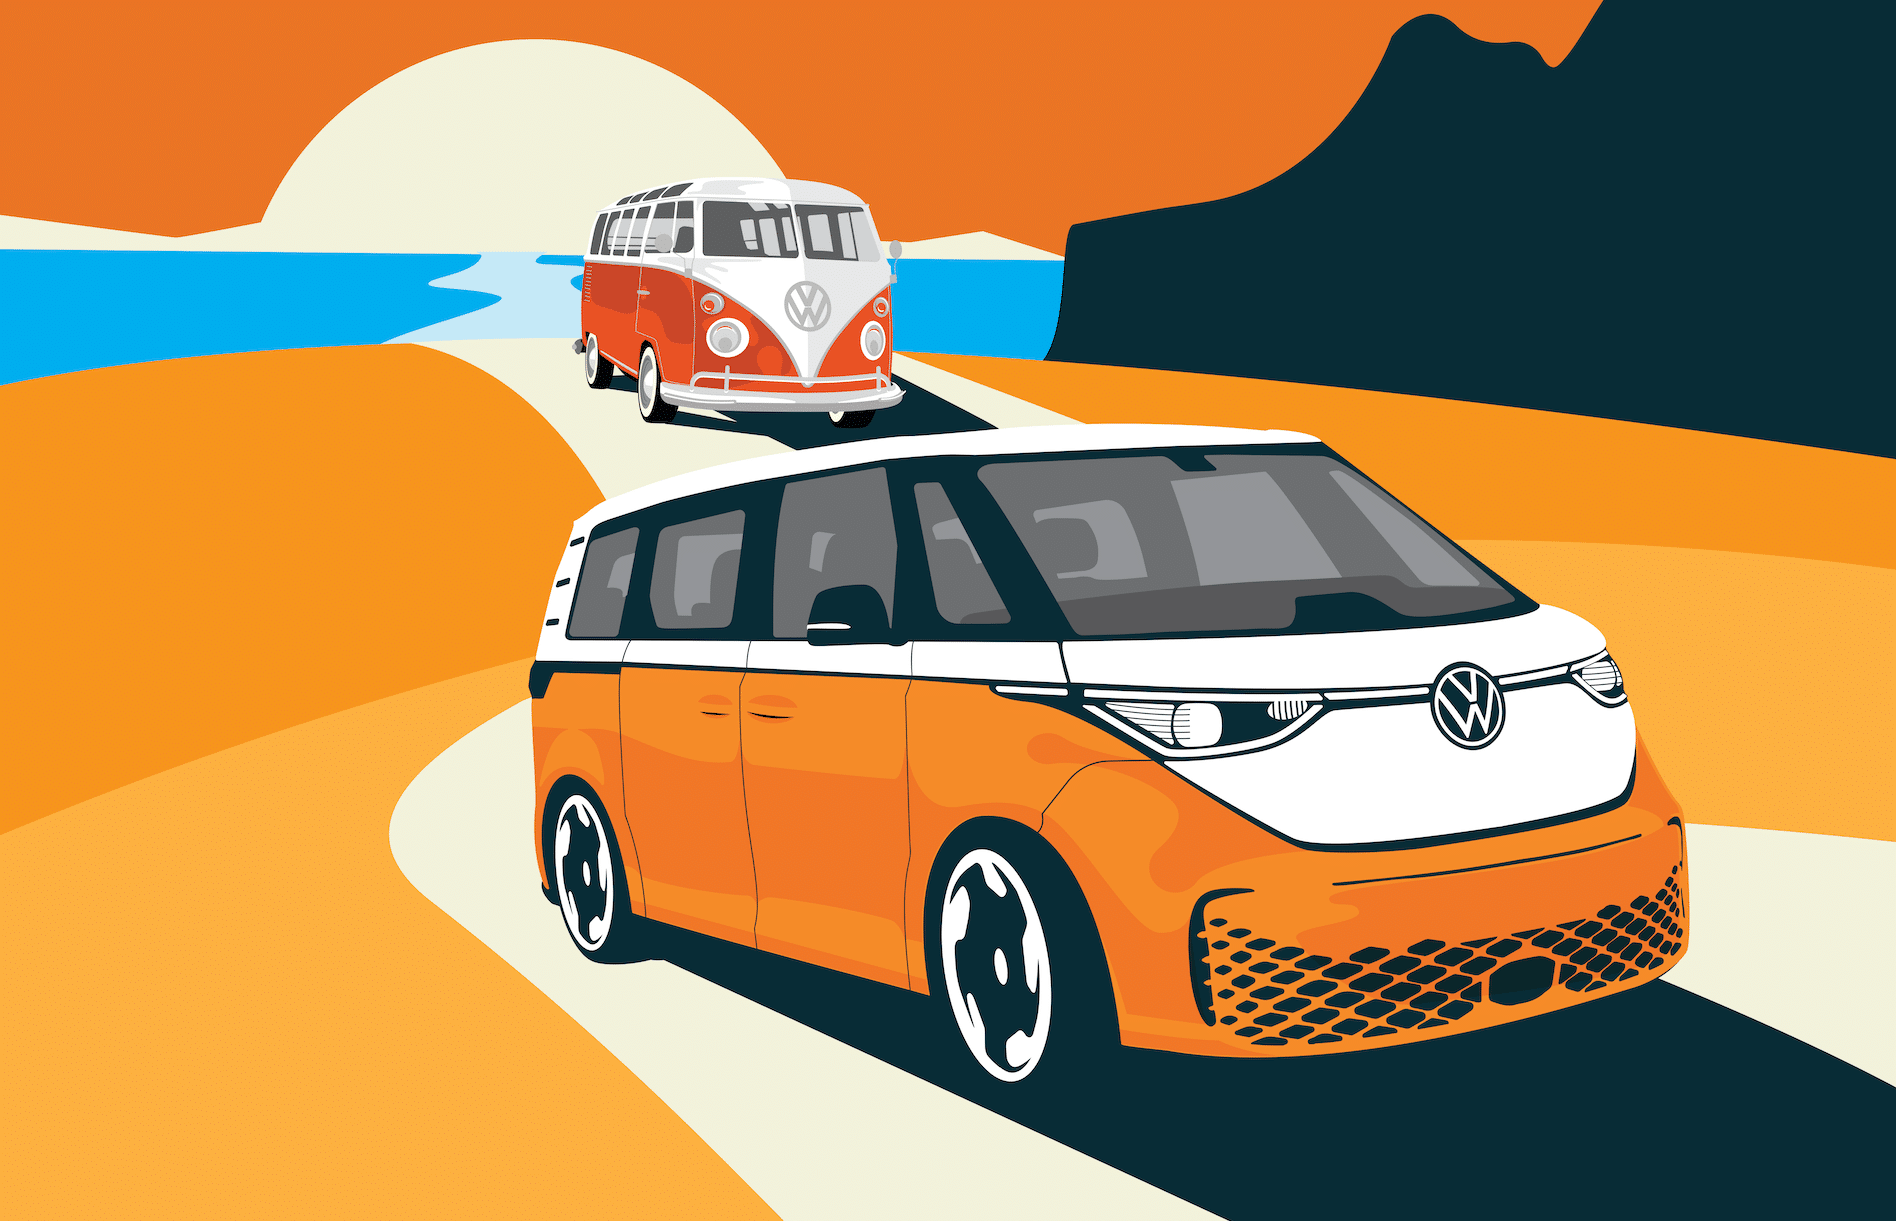 Volkswagen to Launch International Volkswagen Bus Day with Debut of All-Electric ID. Buzz